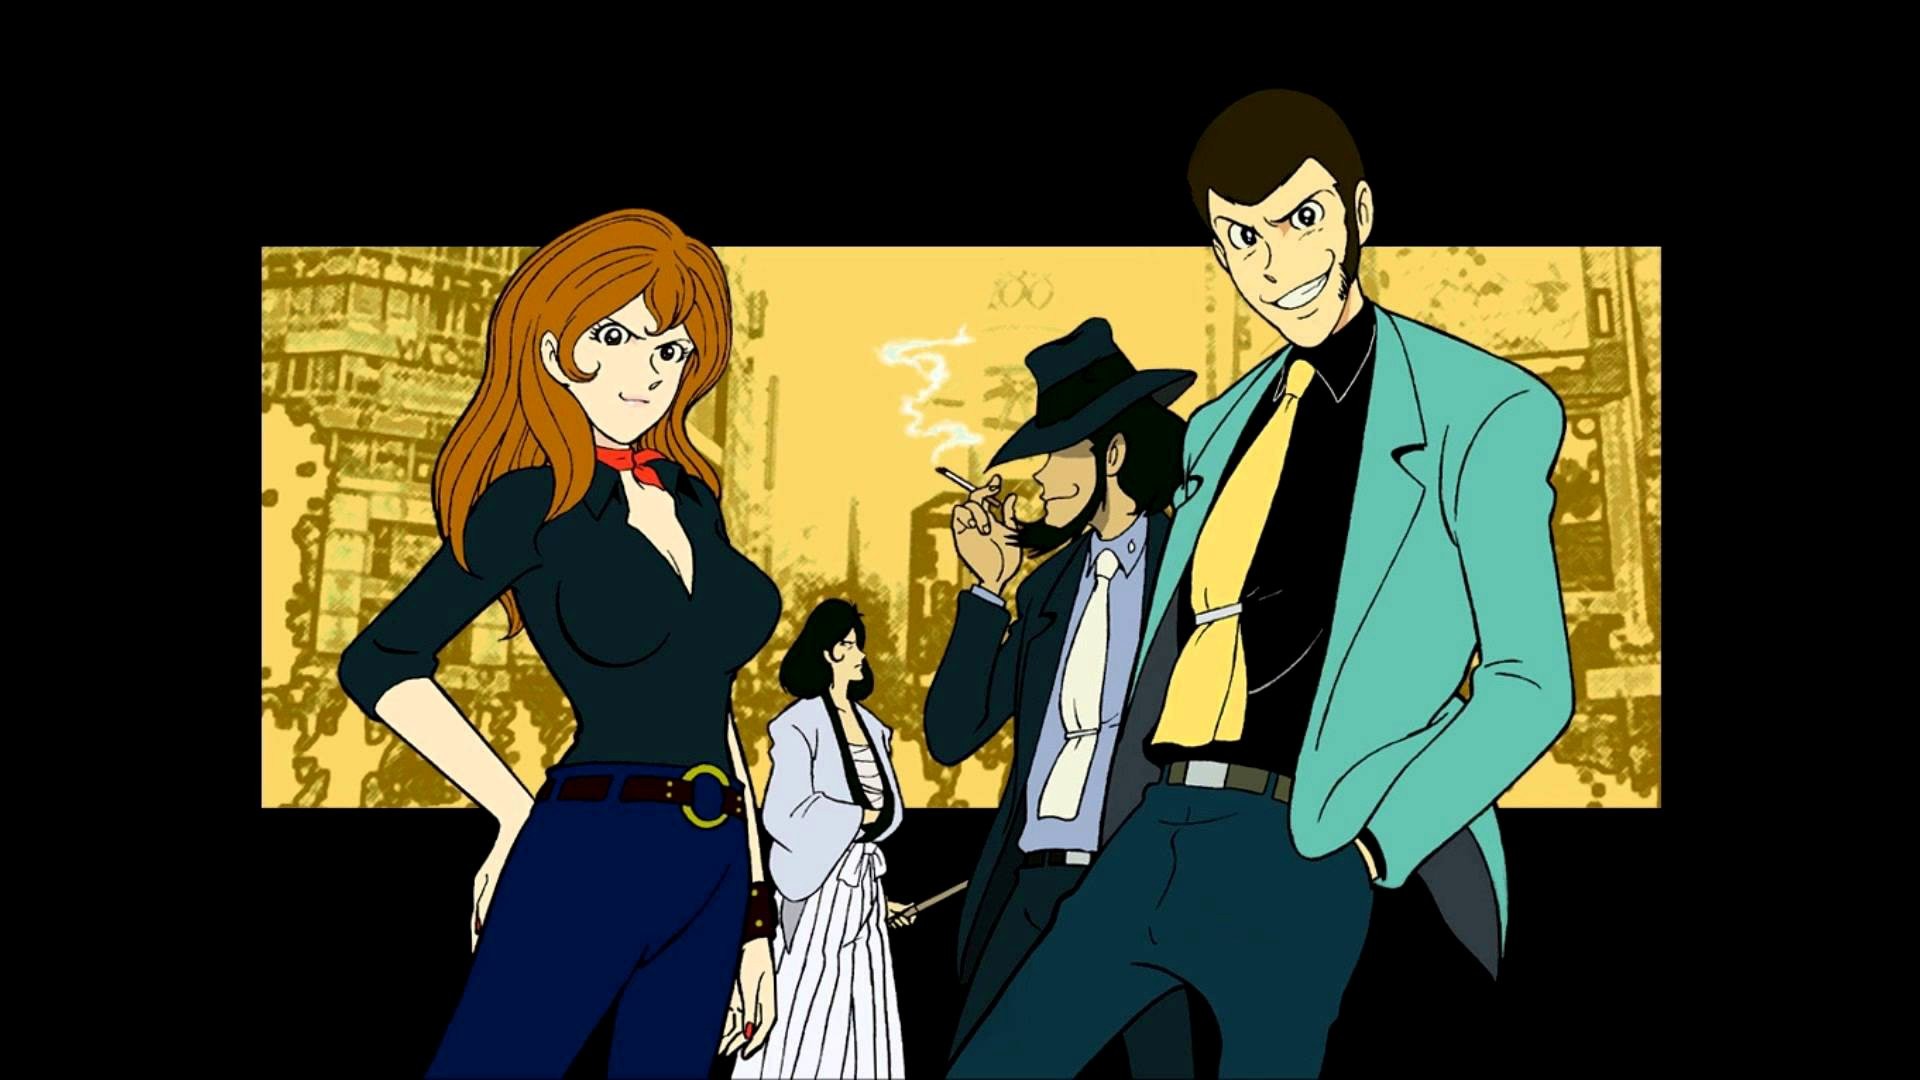 Lupin The Third Wallpaper (80+ images)